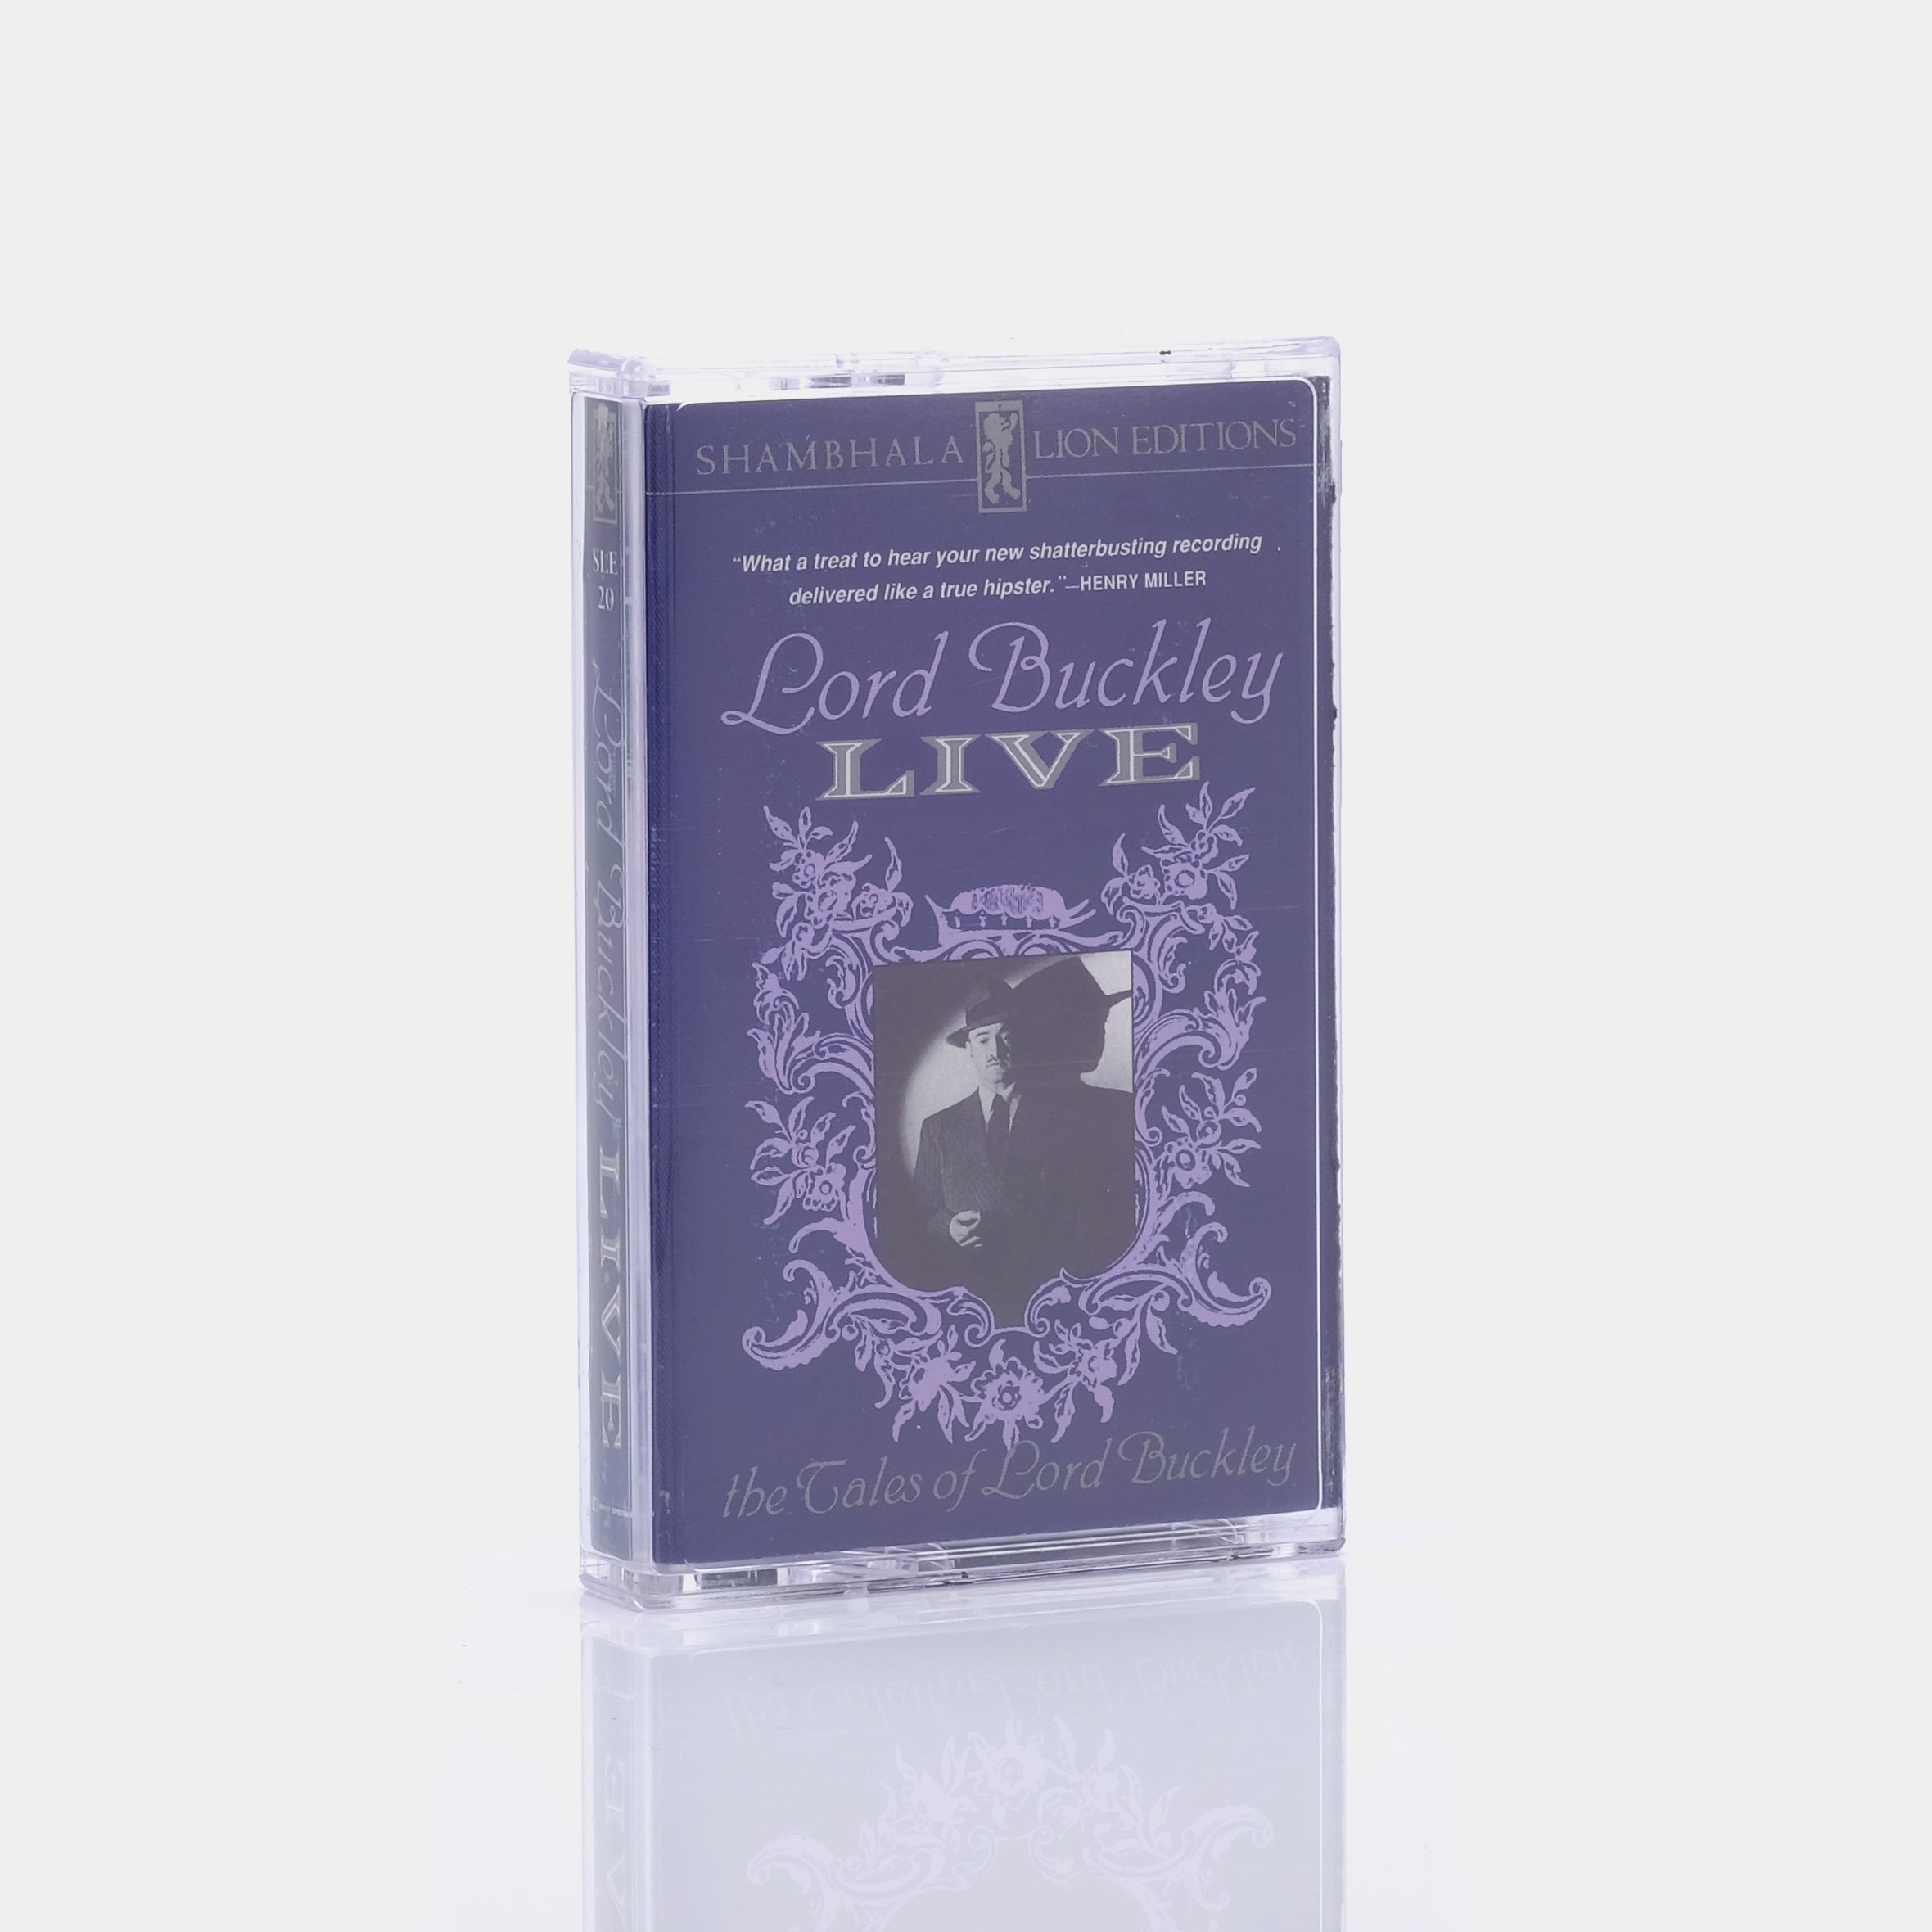 Lord Buckley - Live/The Tales Of Lord Buckley Cassette Tape